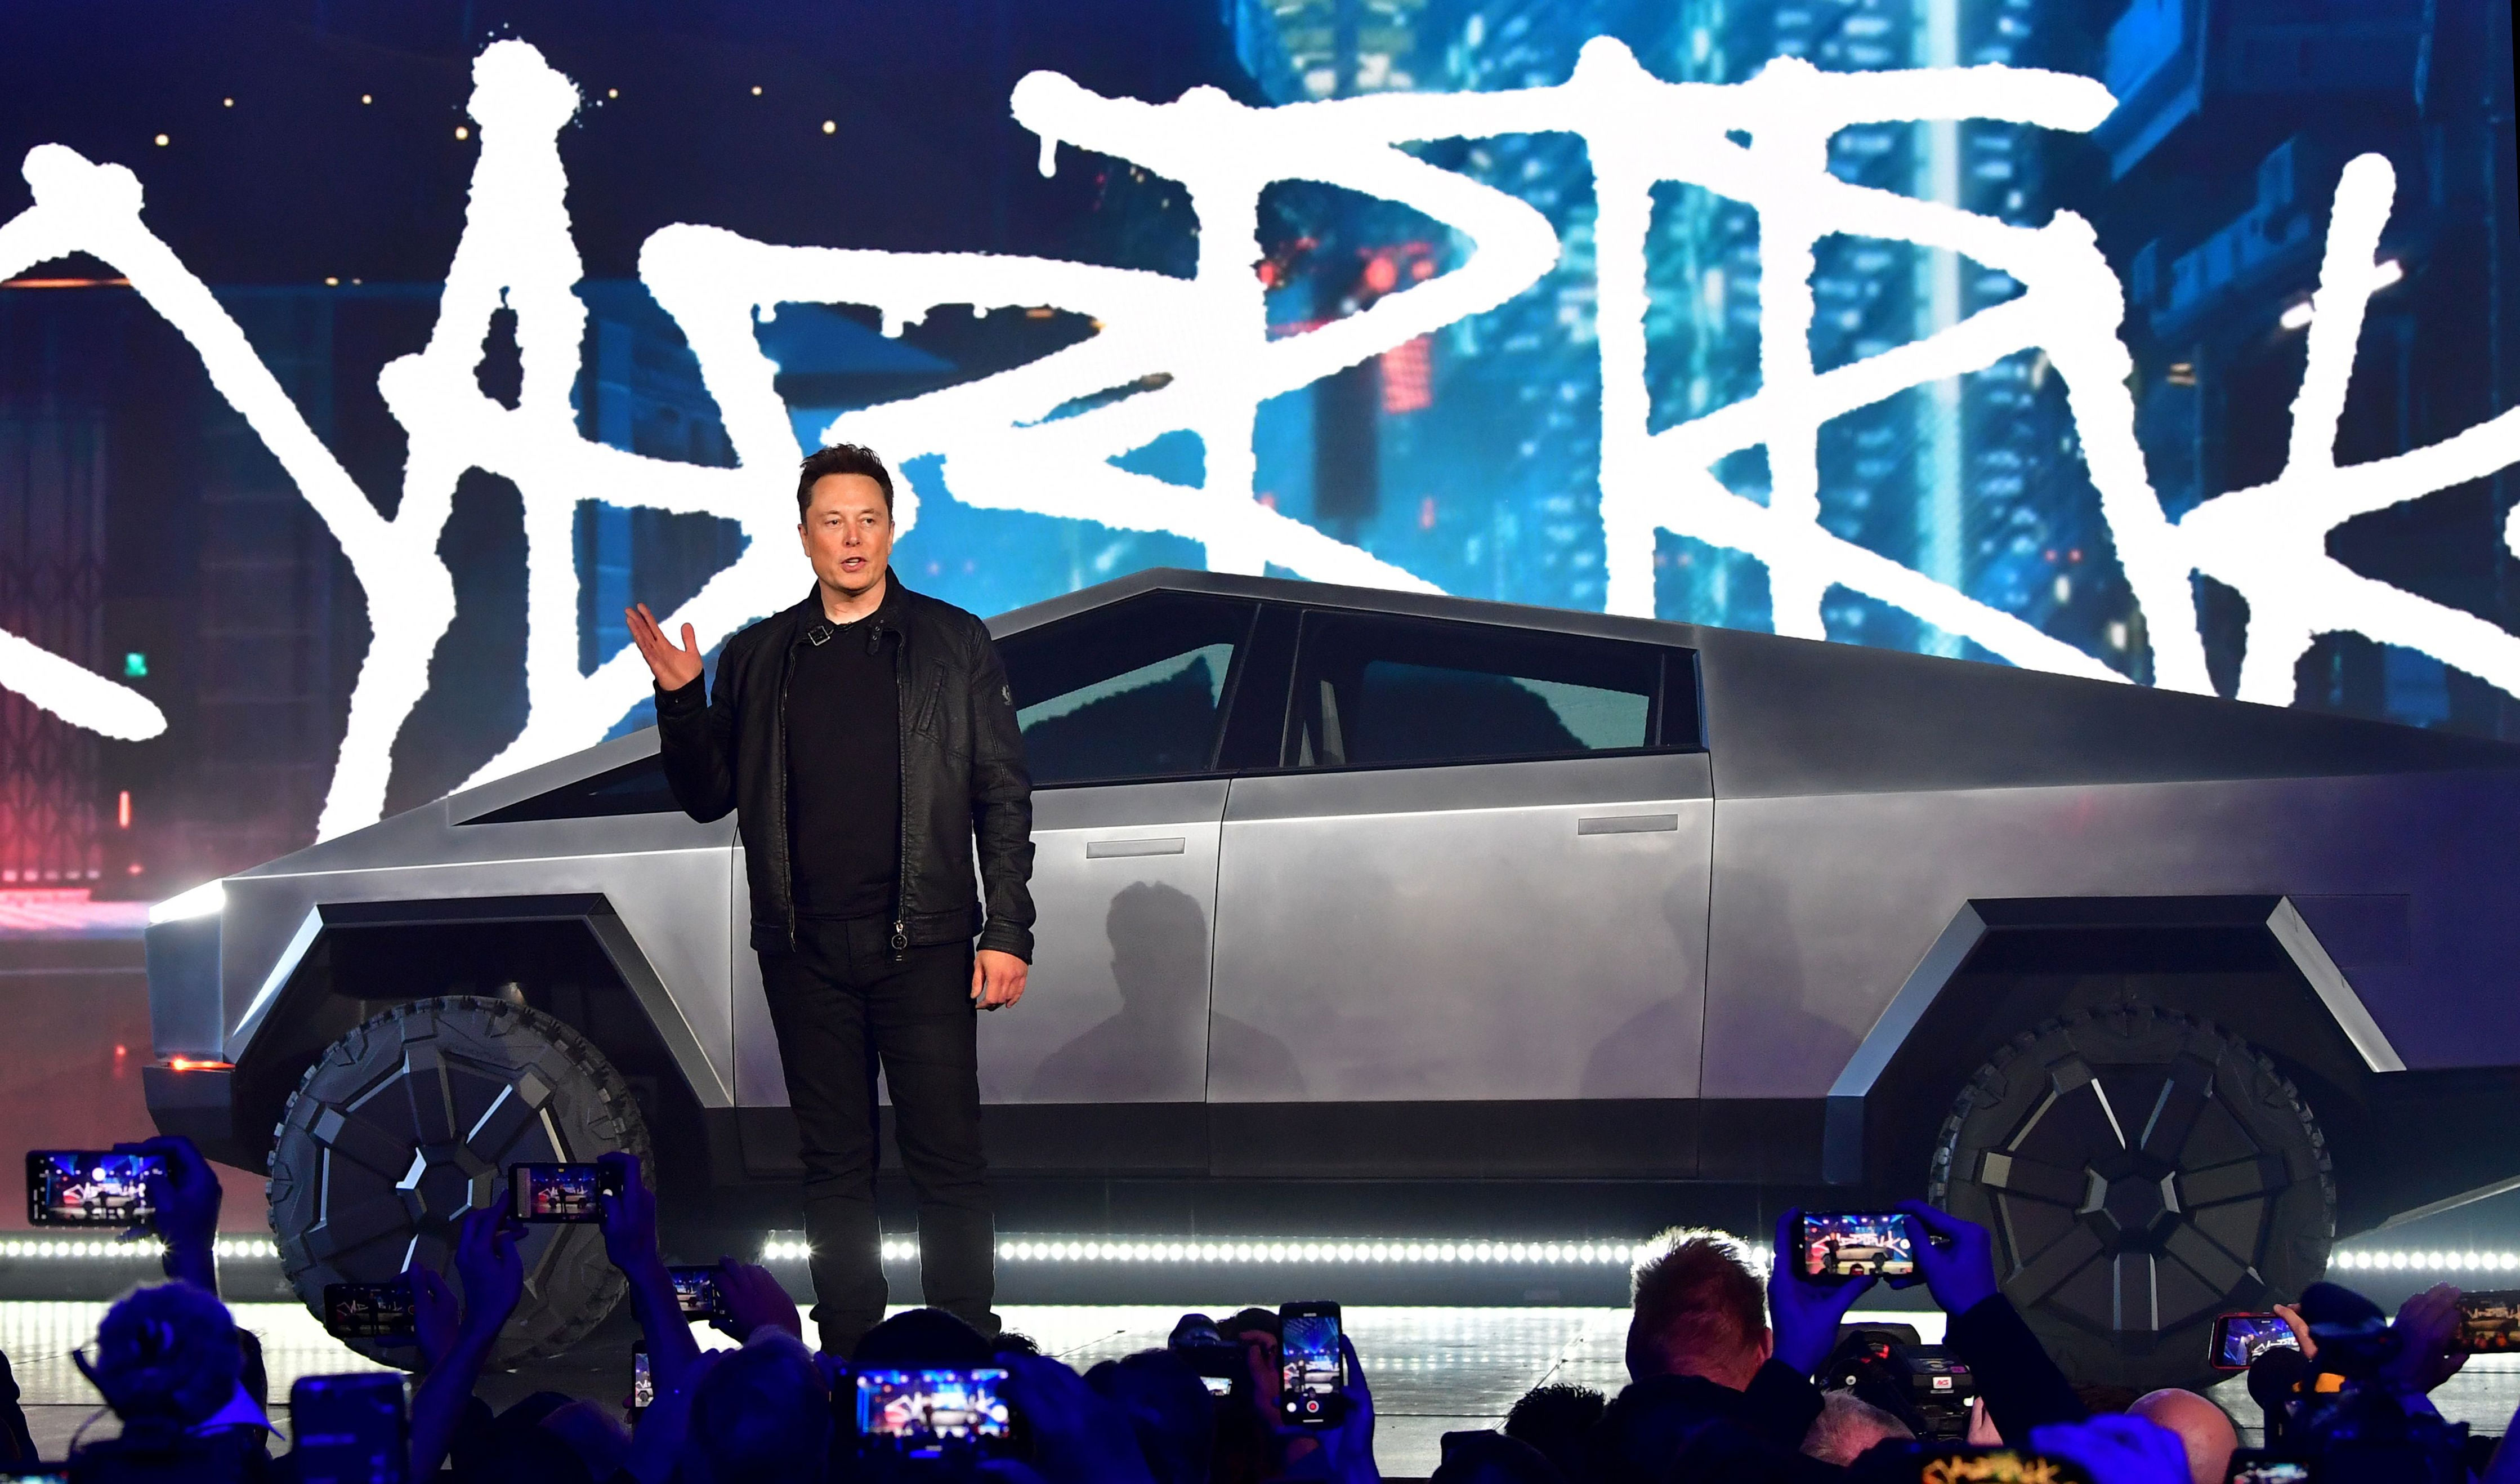 tesla under elon musk made the first best electric car. but will it make the next?